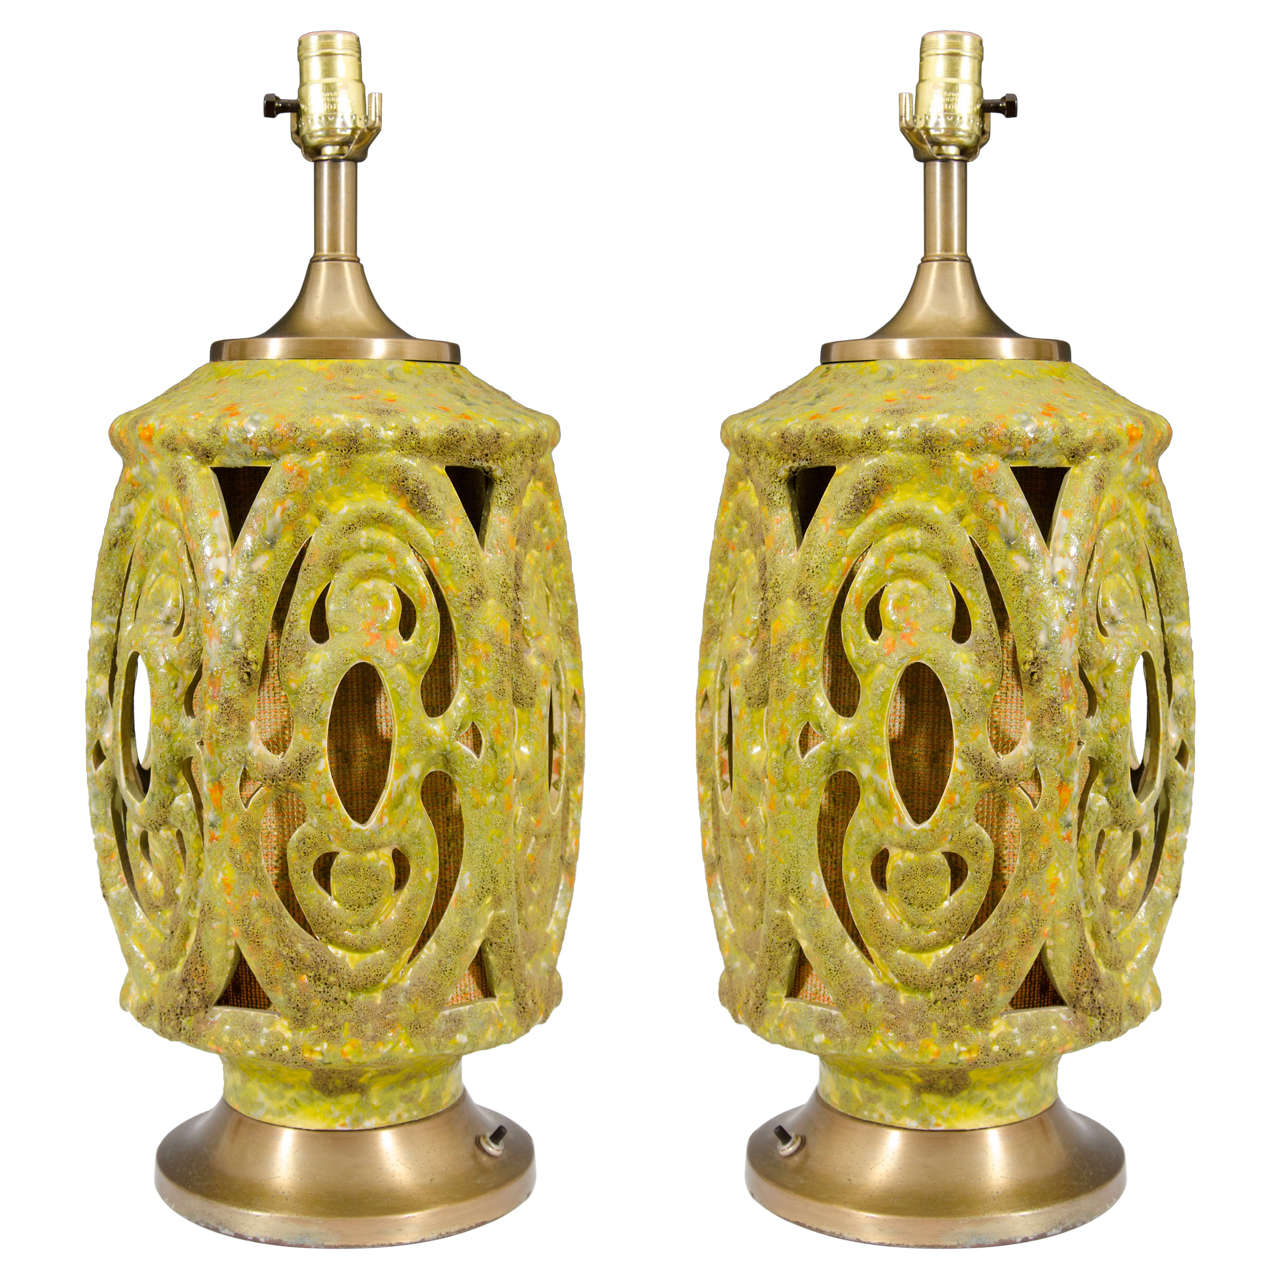 Midcentury Pair of Table Lamps with Olive Green Volcanic Glaze